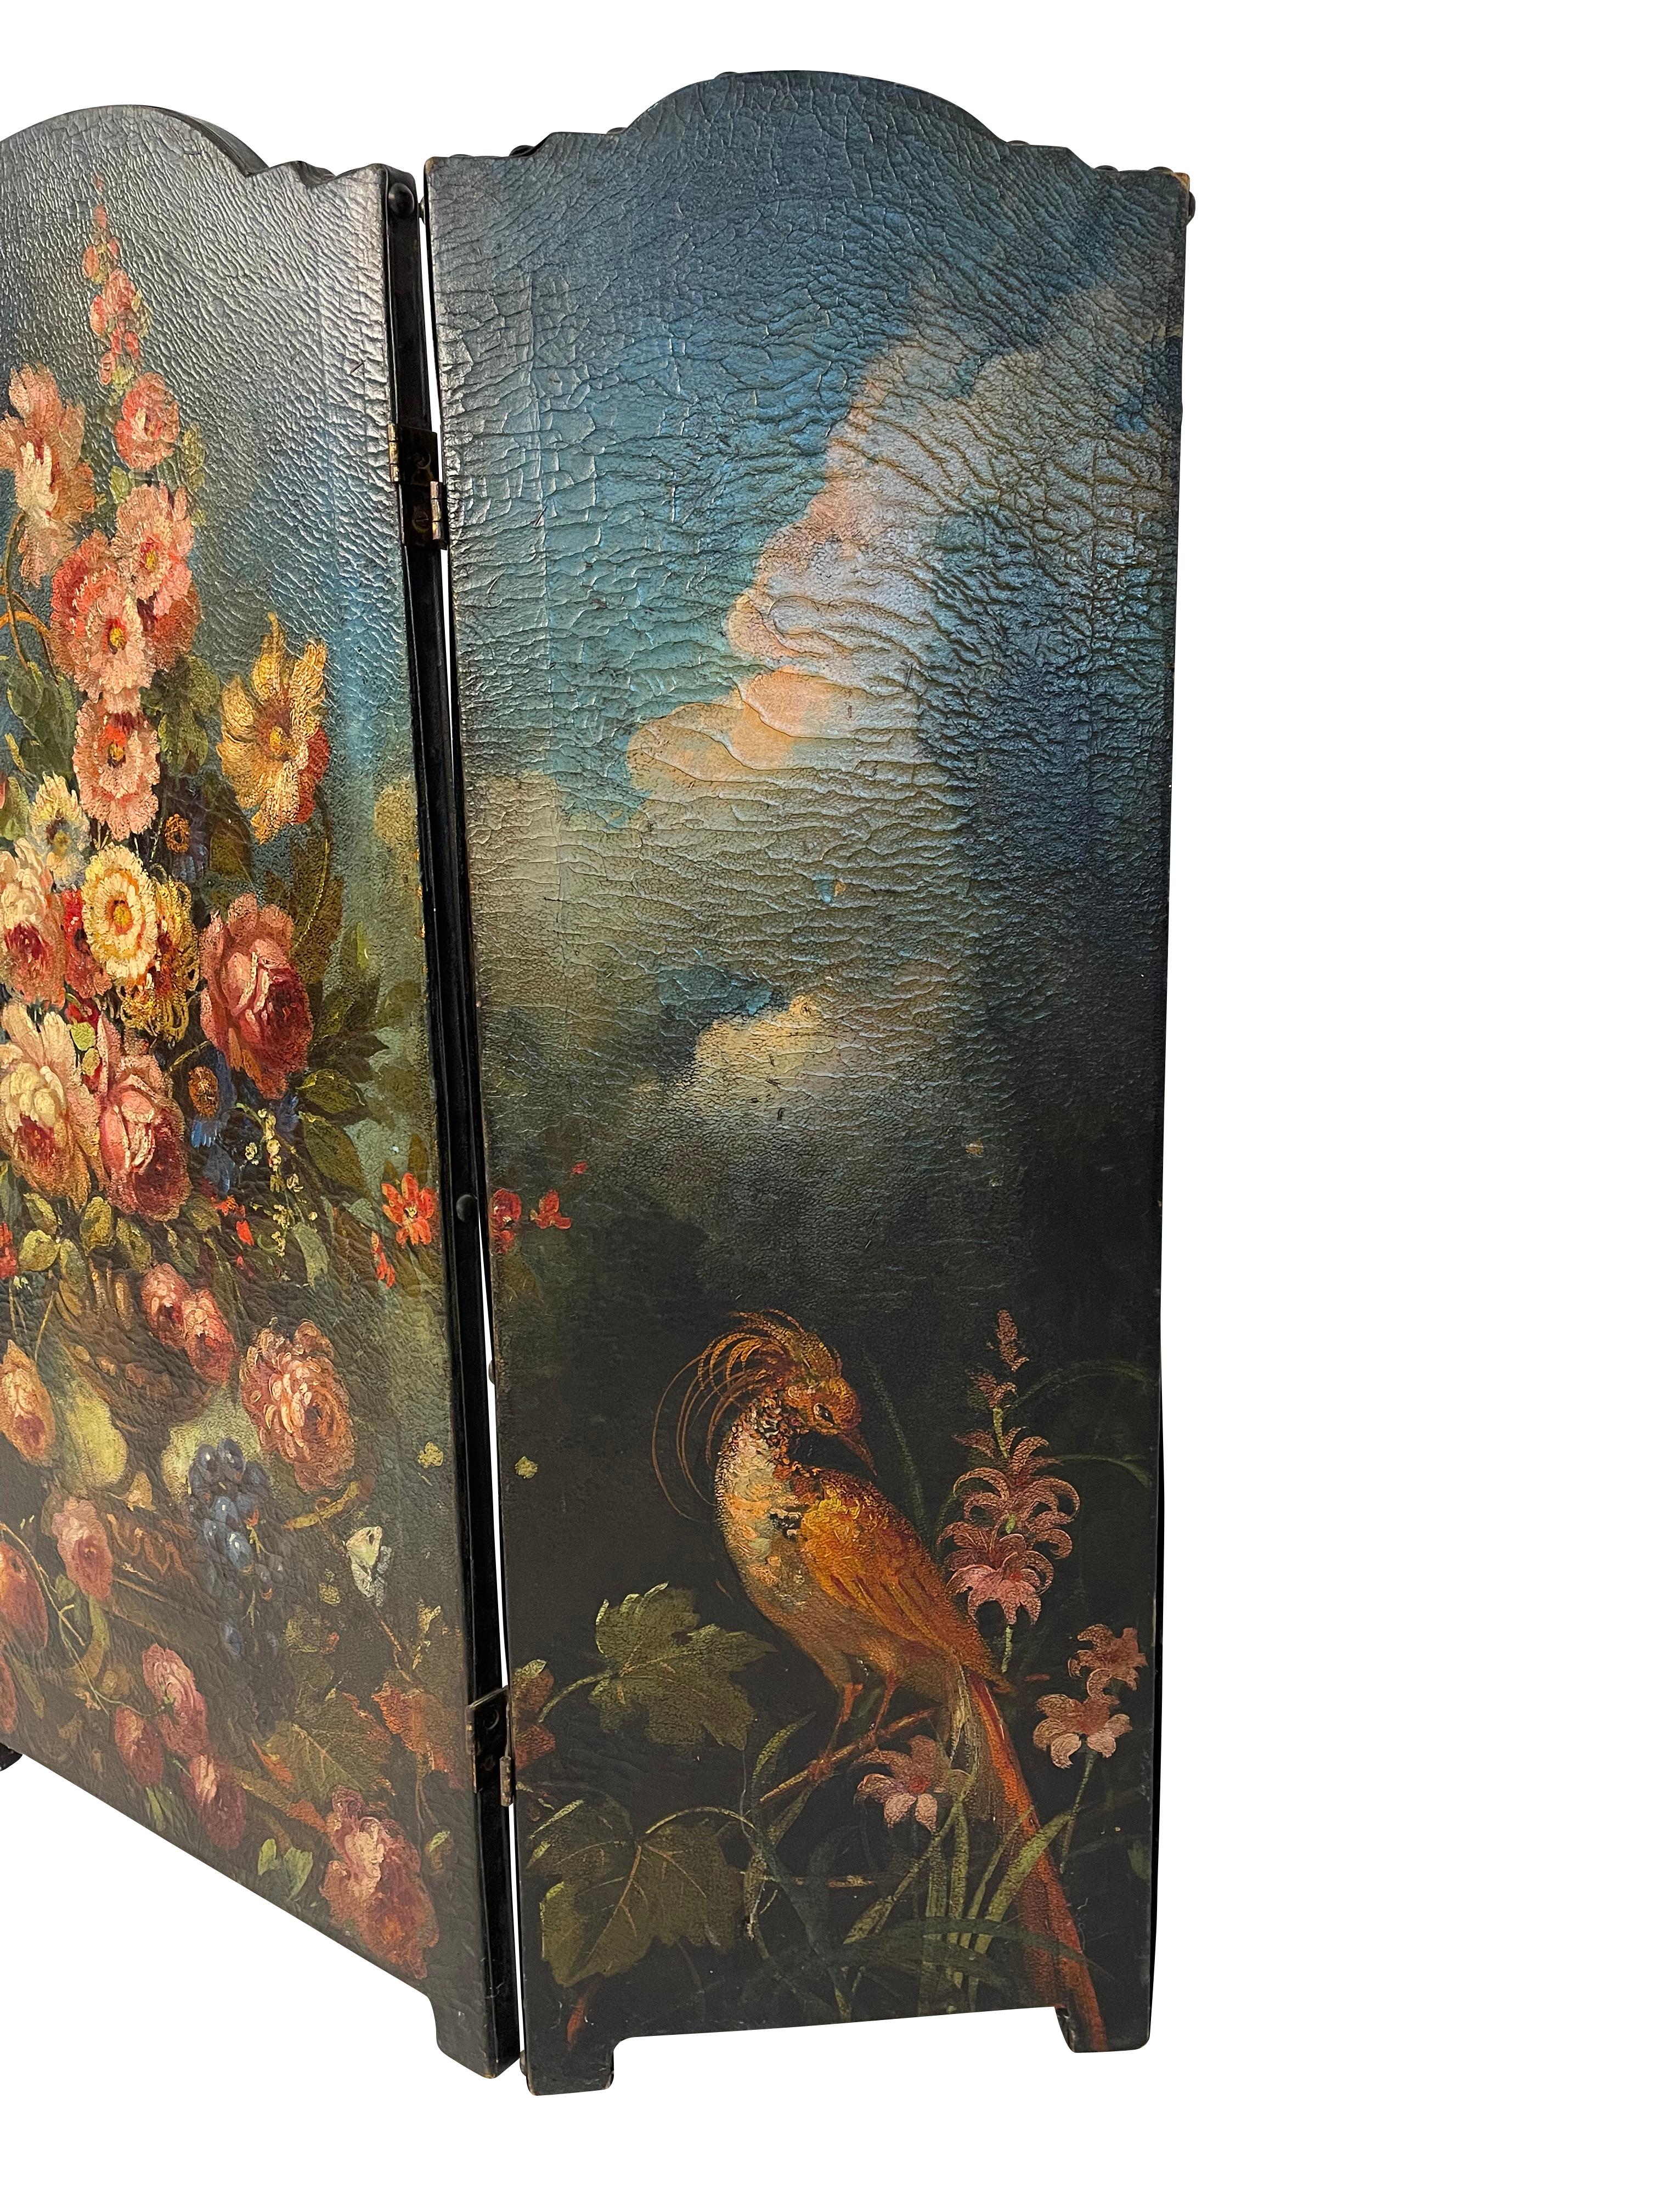 Antique Hand-Painted Floral Leather Fire Screen In Good Condition For Sale In Essex, MA